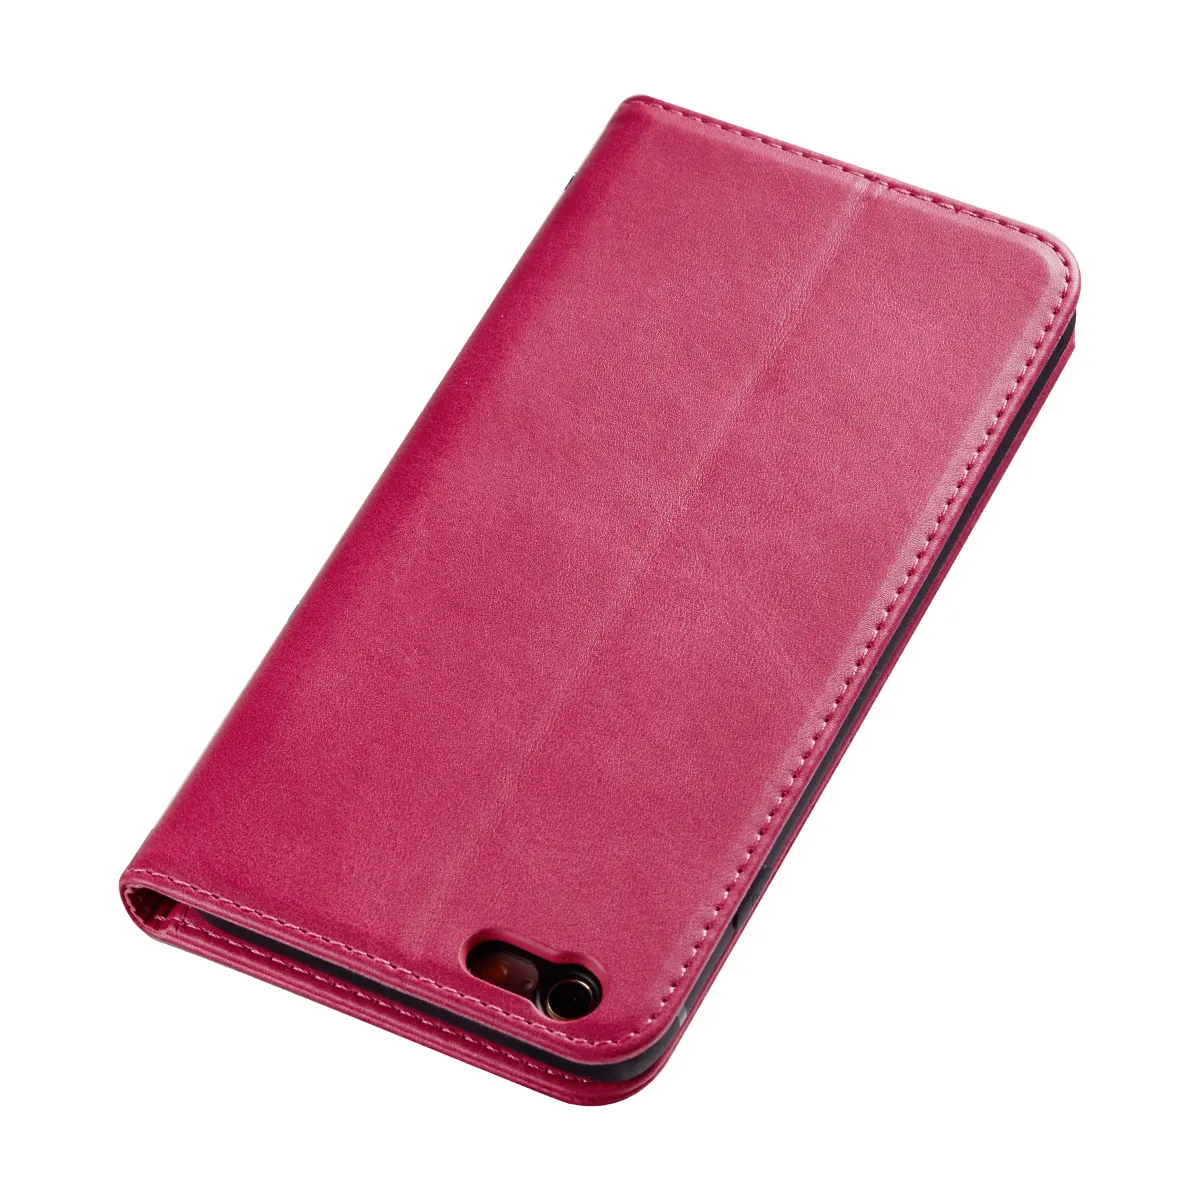 Wholesale Popular Wallet Leather Flip Case Cover Shockproof Leather Case For iphone6 plus